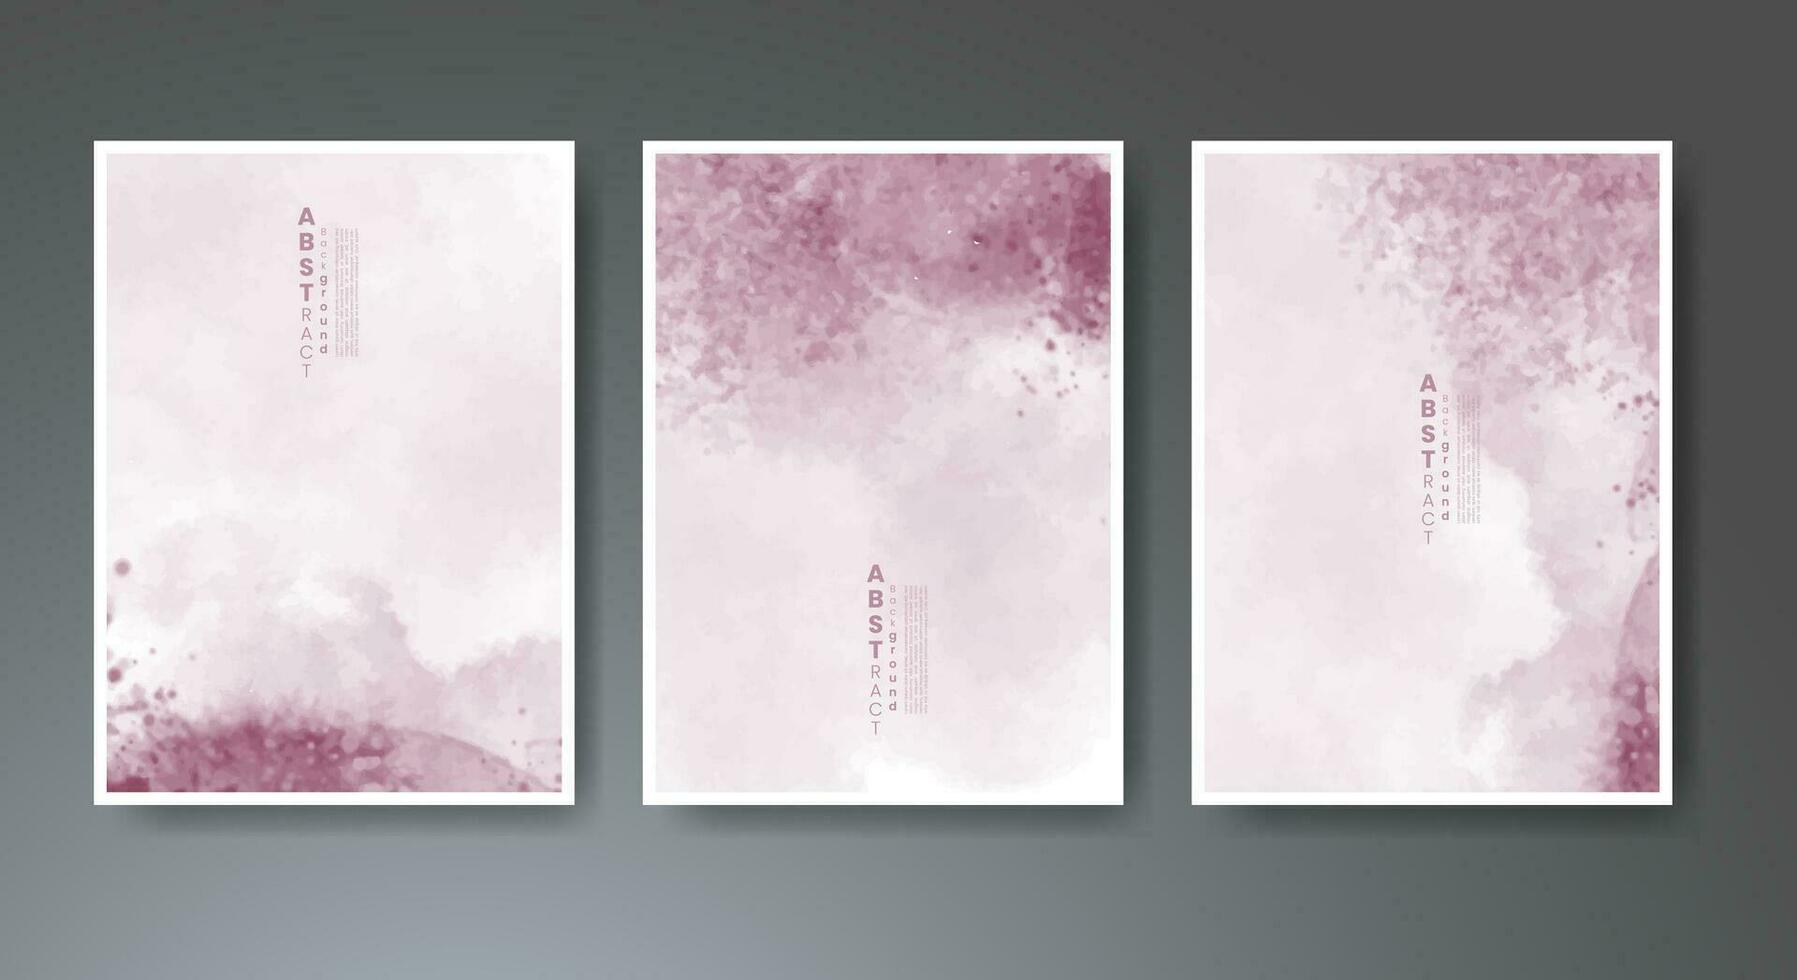 Set of soft bright watercolor background. Design for your cover, date, postcard, banner, logo. vector